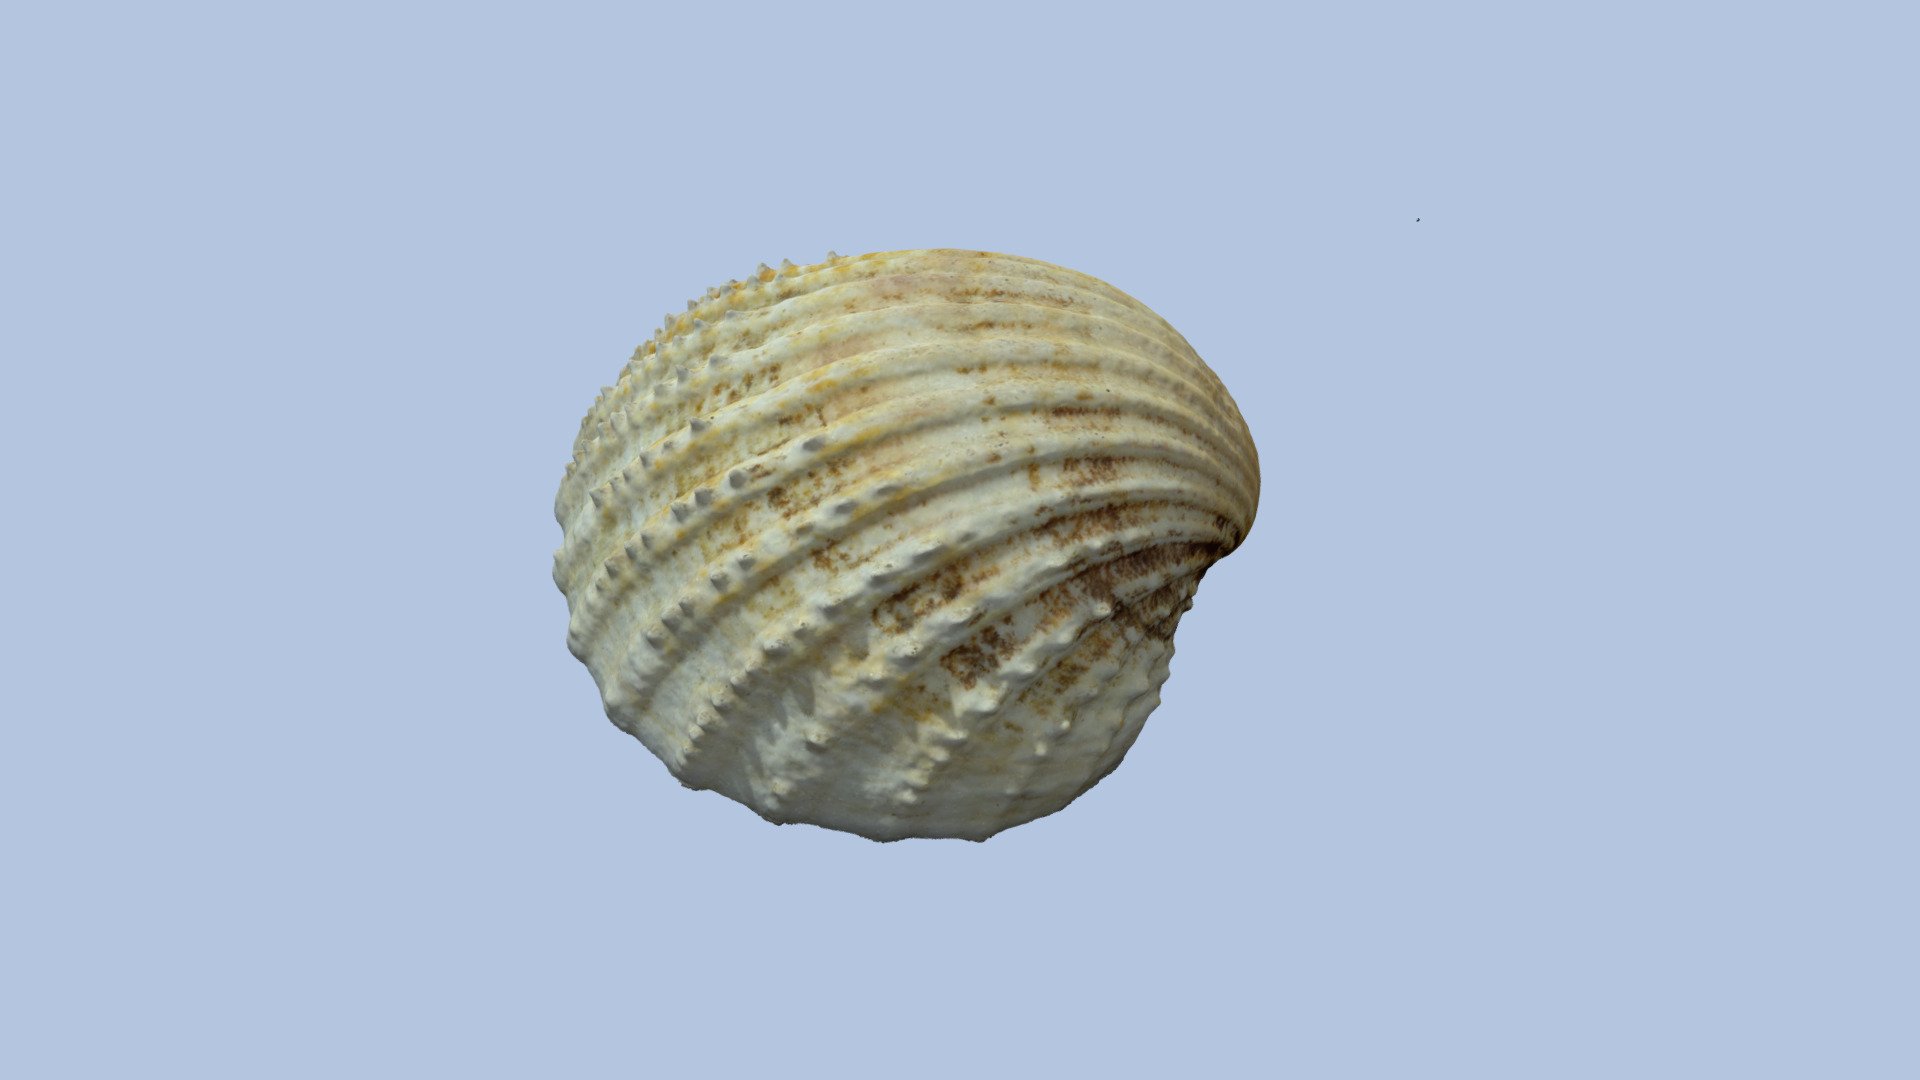 I think that this is a Prickly Cockle (Acanthocardia echinata) that I found on the beach a few years ago.

This model was created using openMVG and openMVS from 180 original photographs 3d model